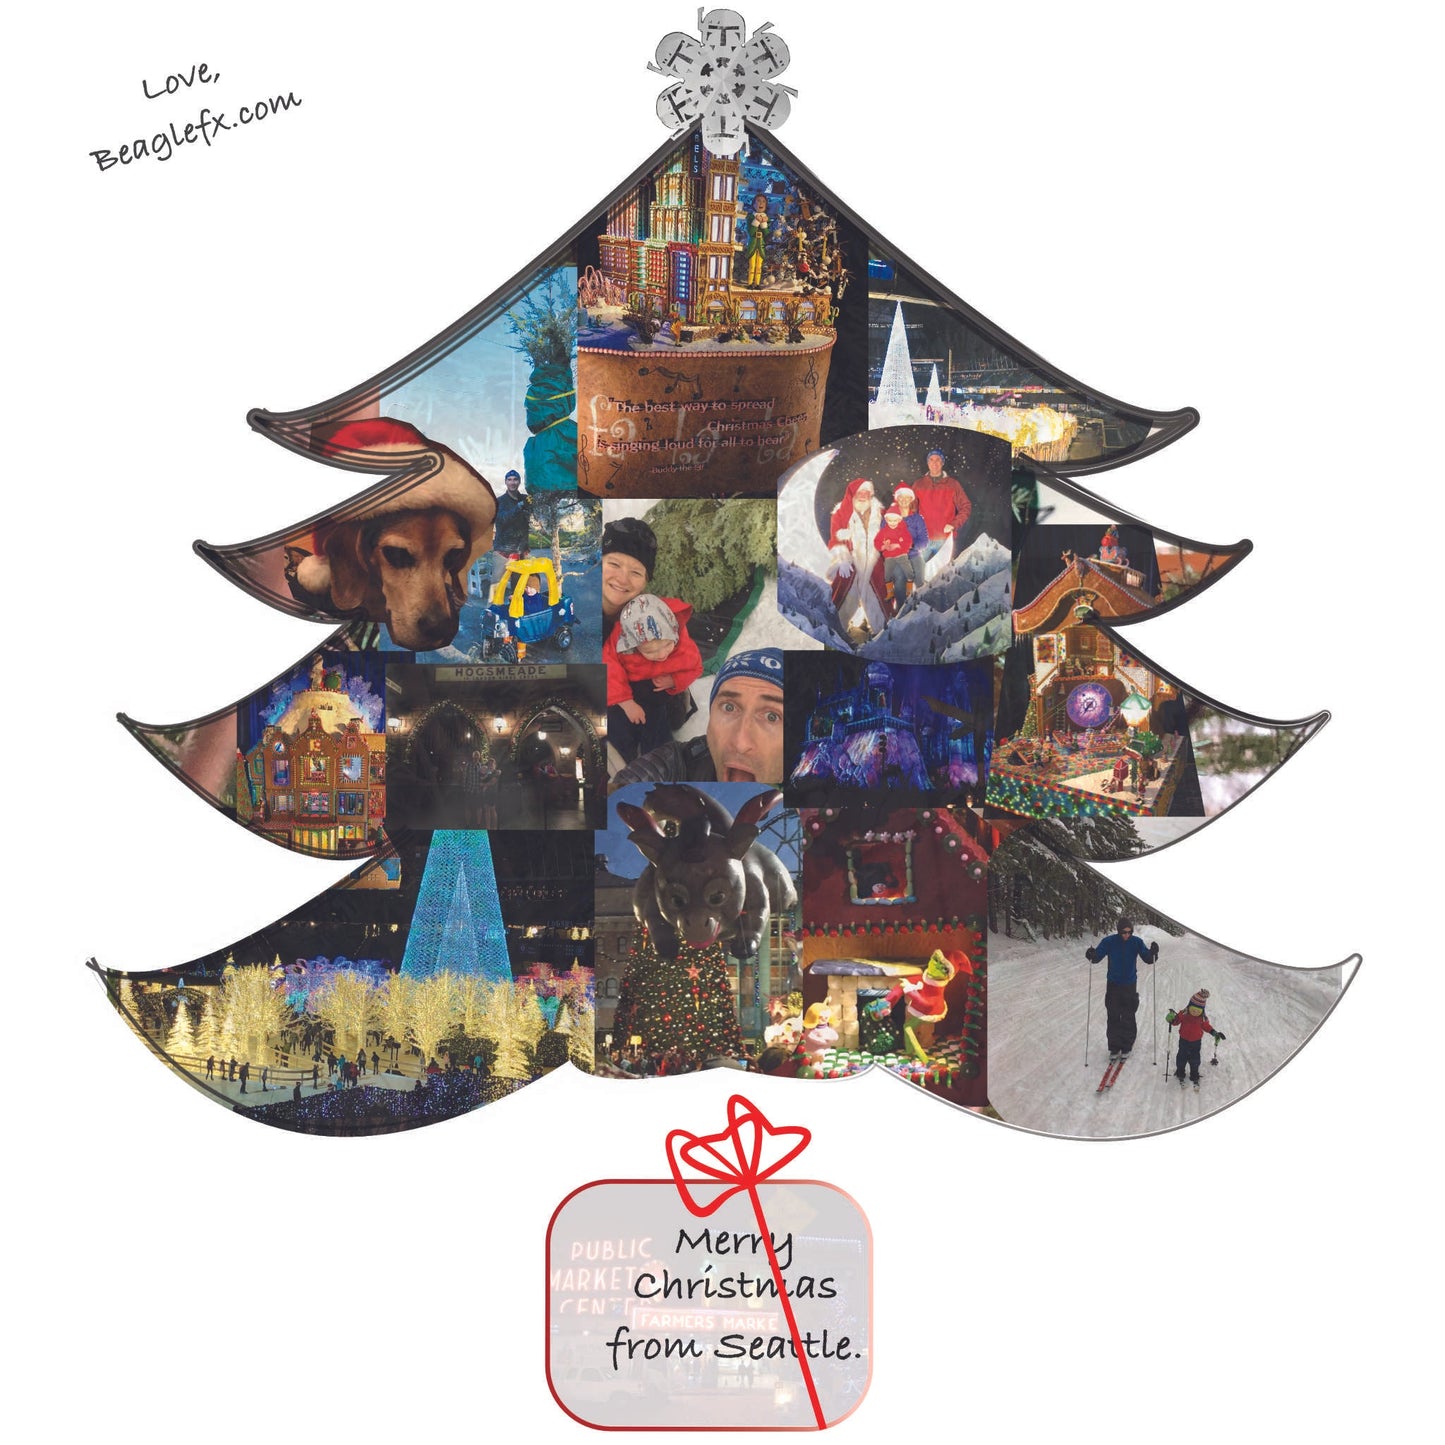 Photo collage with photos of gingerbread houses, Christmas lights, skiing, parades, Harry Potter, Santa, and trees. These are set inside a Christmas tree frame. Individual photos set in "gifts" underneath the tree.